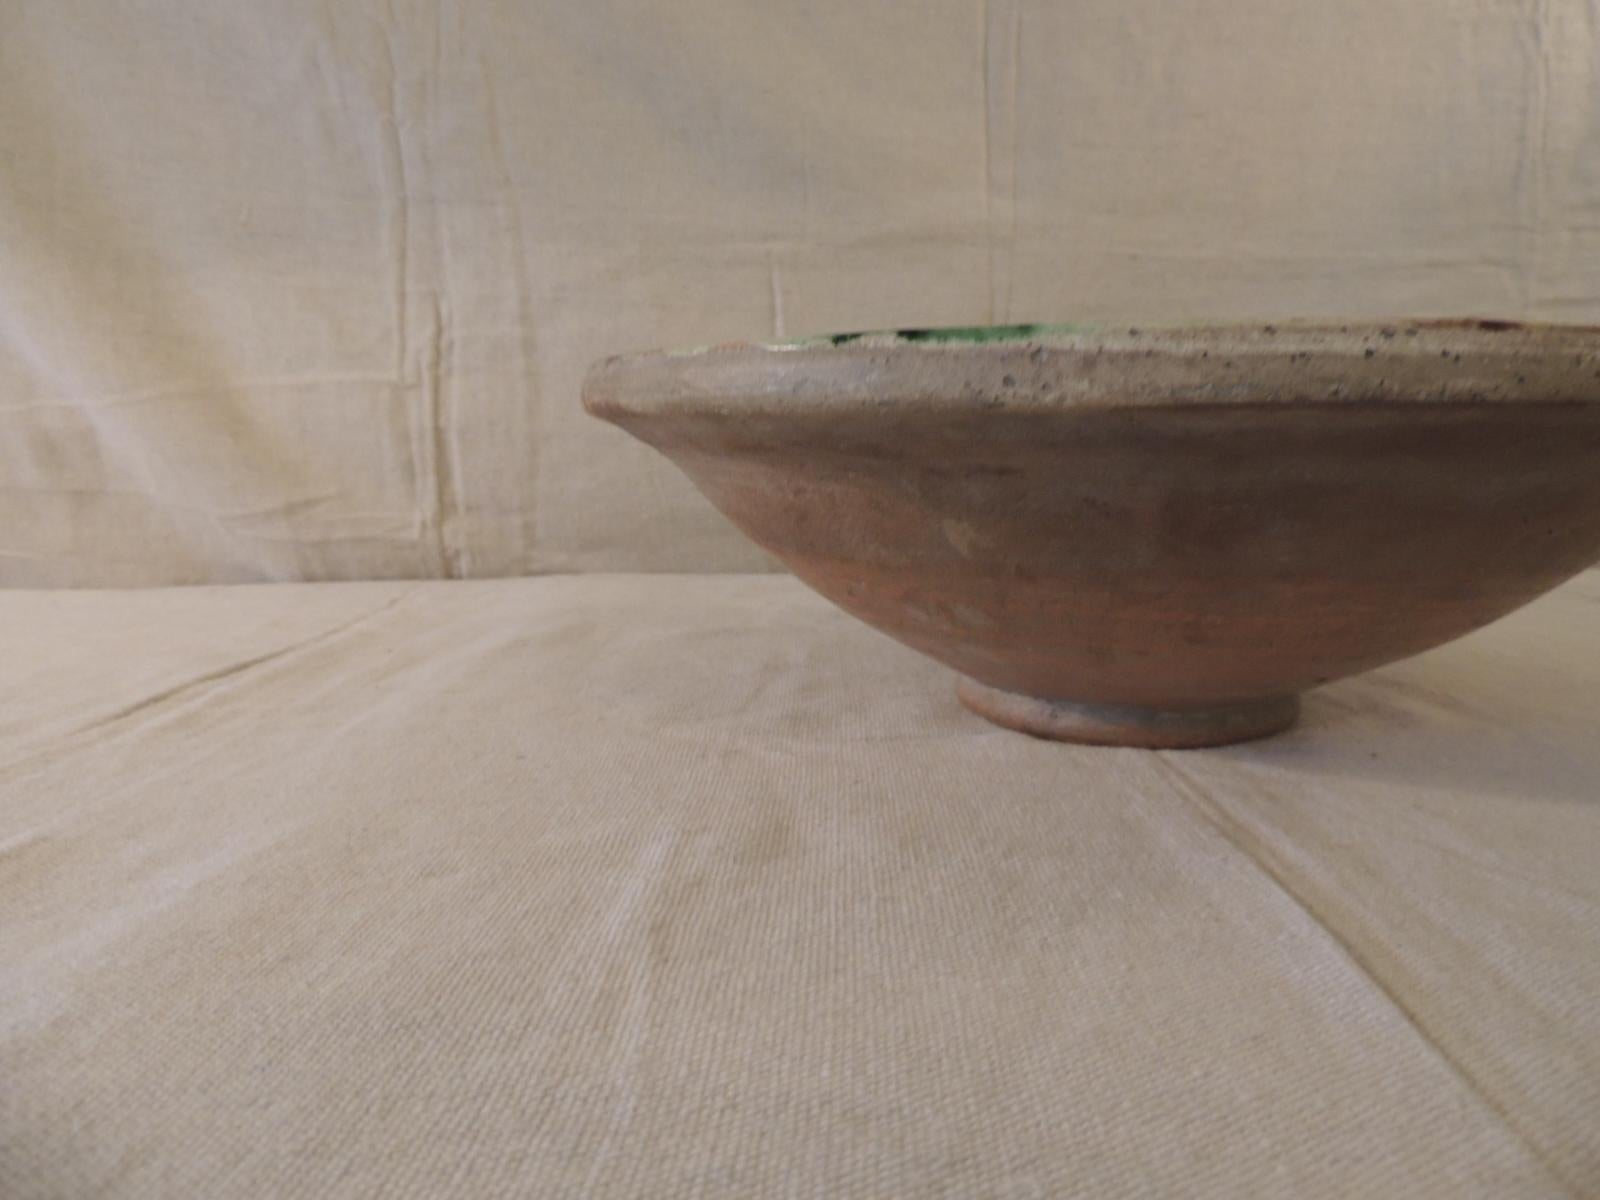 Country Antique Green and Brown Glazed Terracotta Bowl